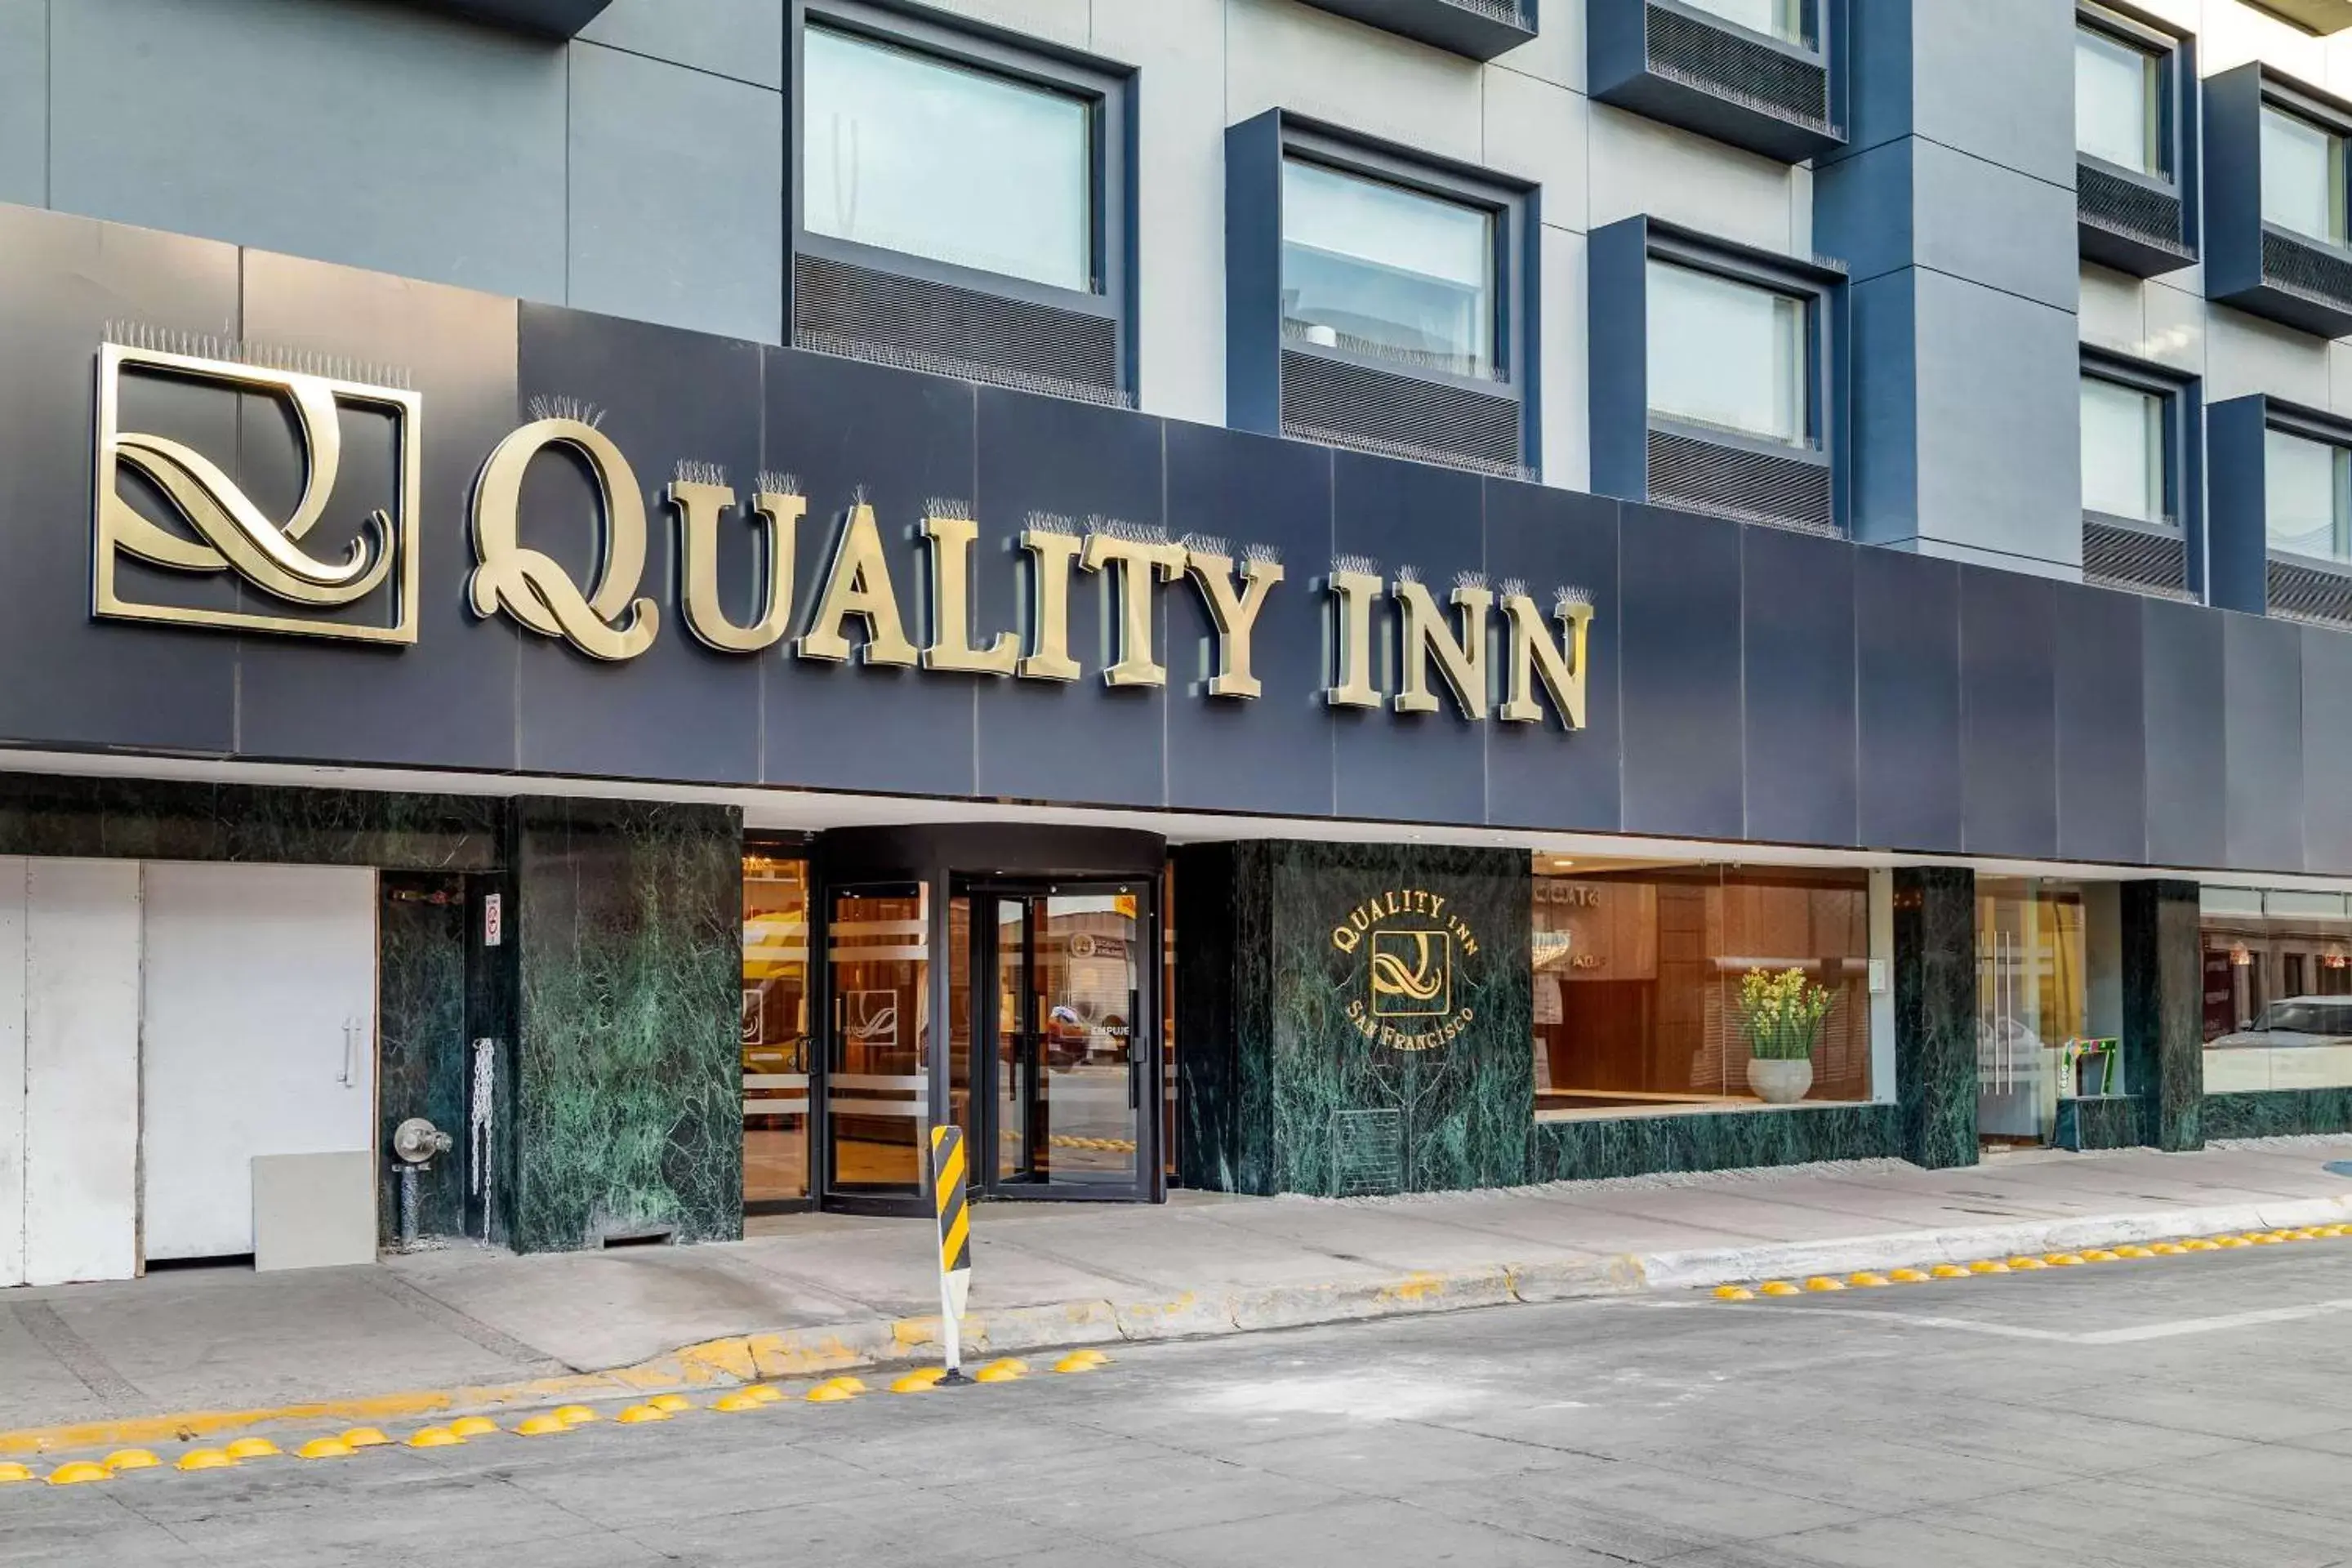 Property building in Quality Inn Chihuahua San Francisco